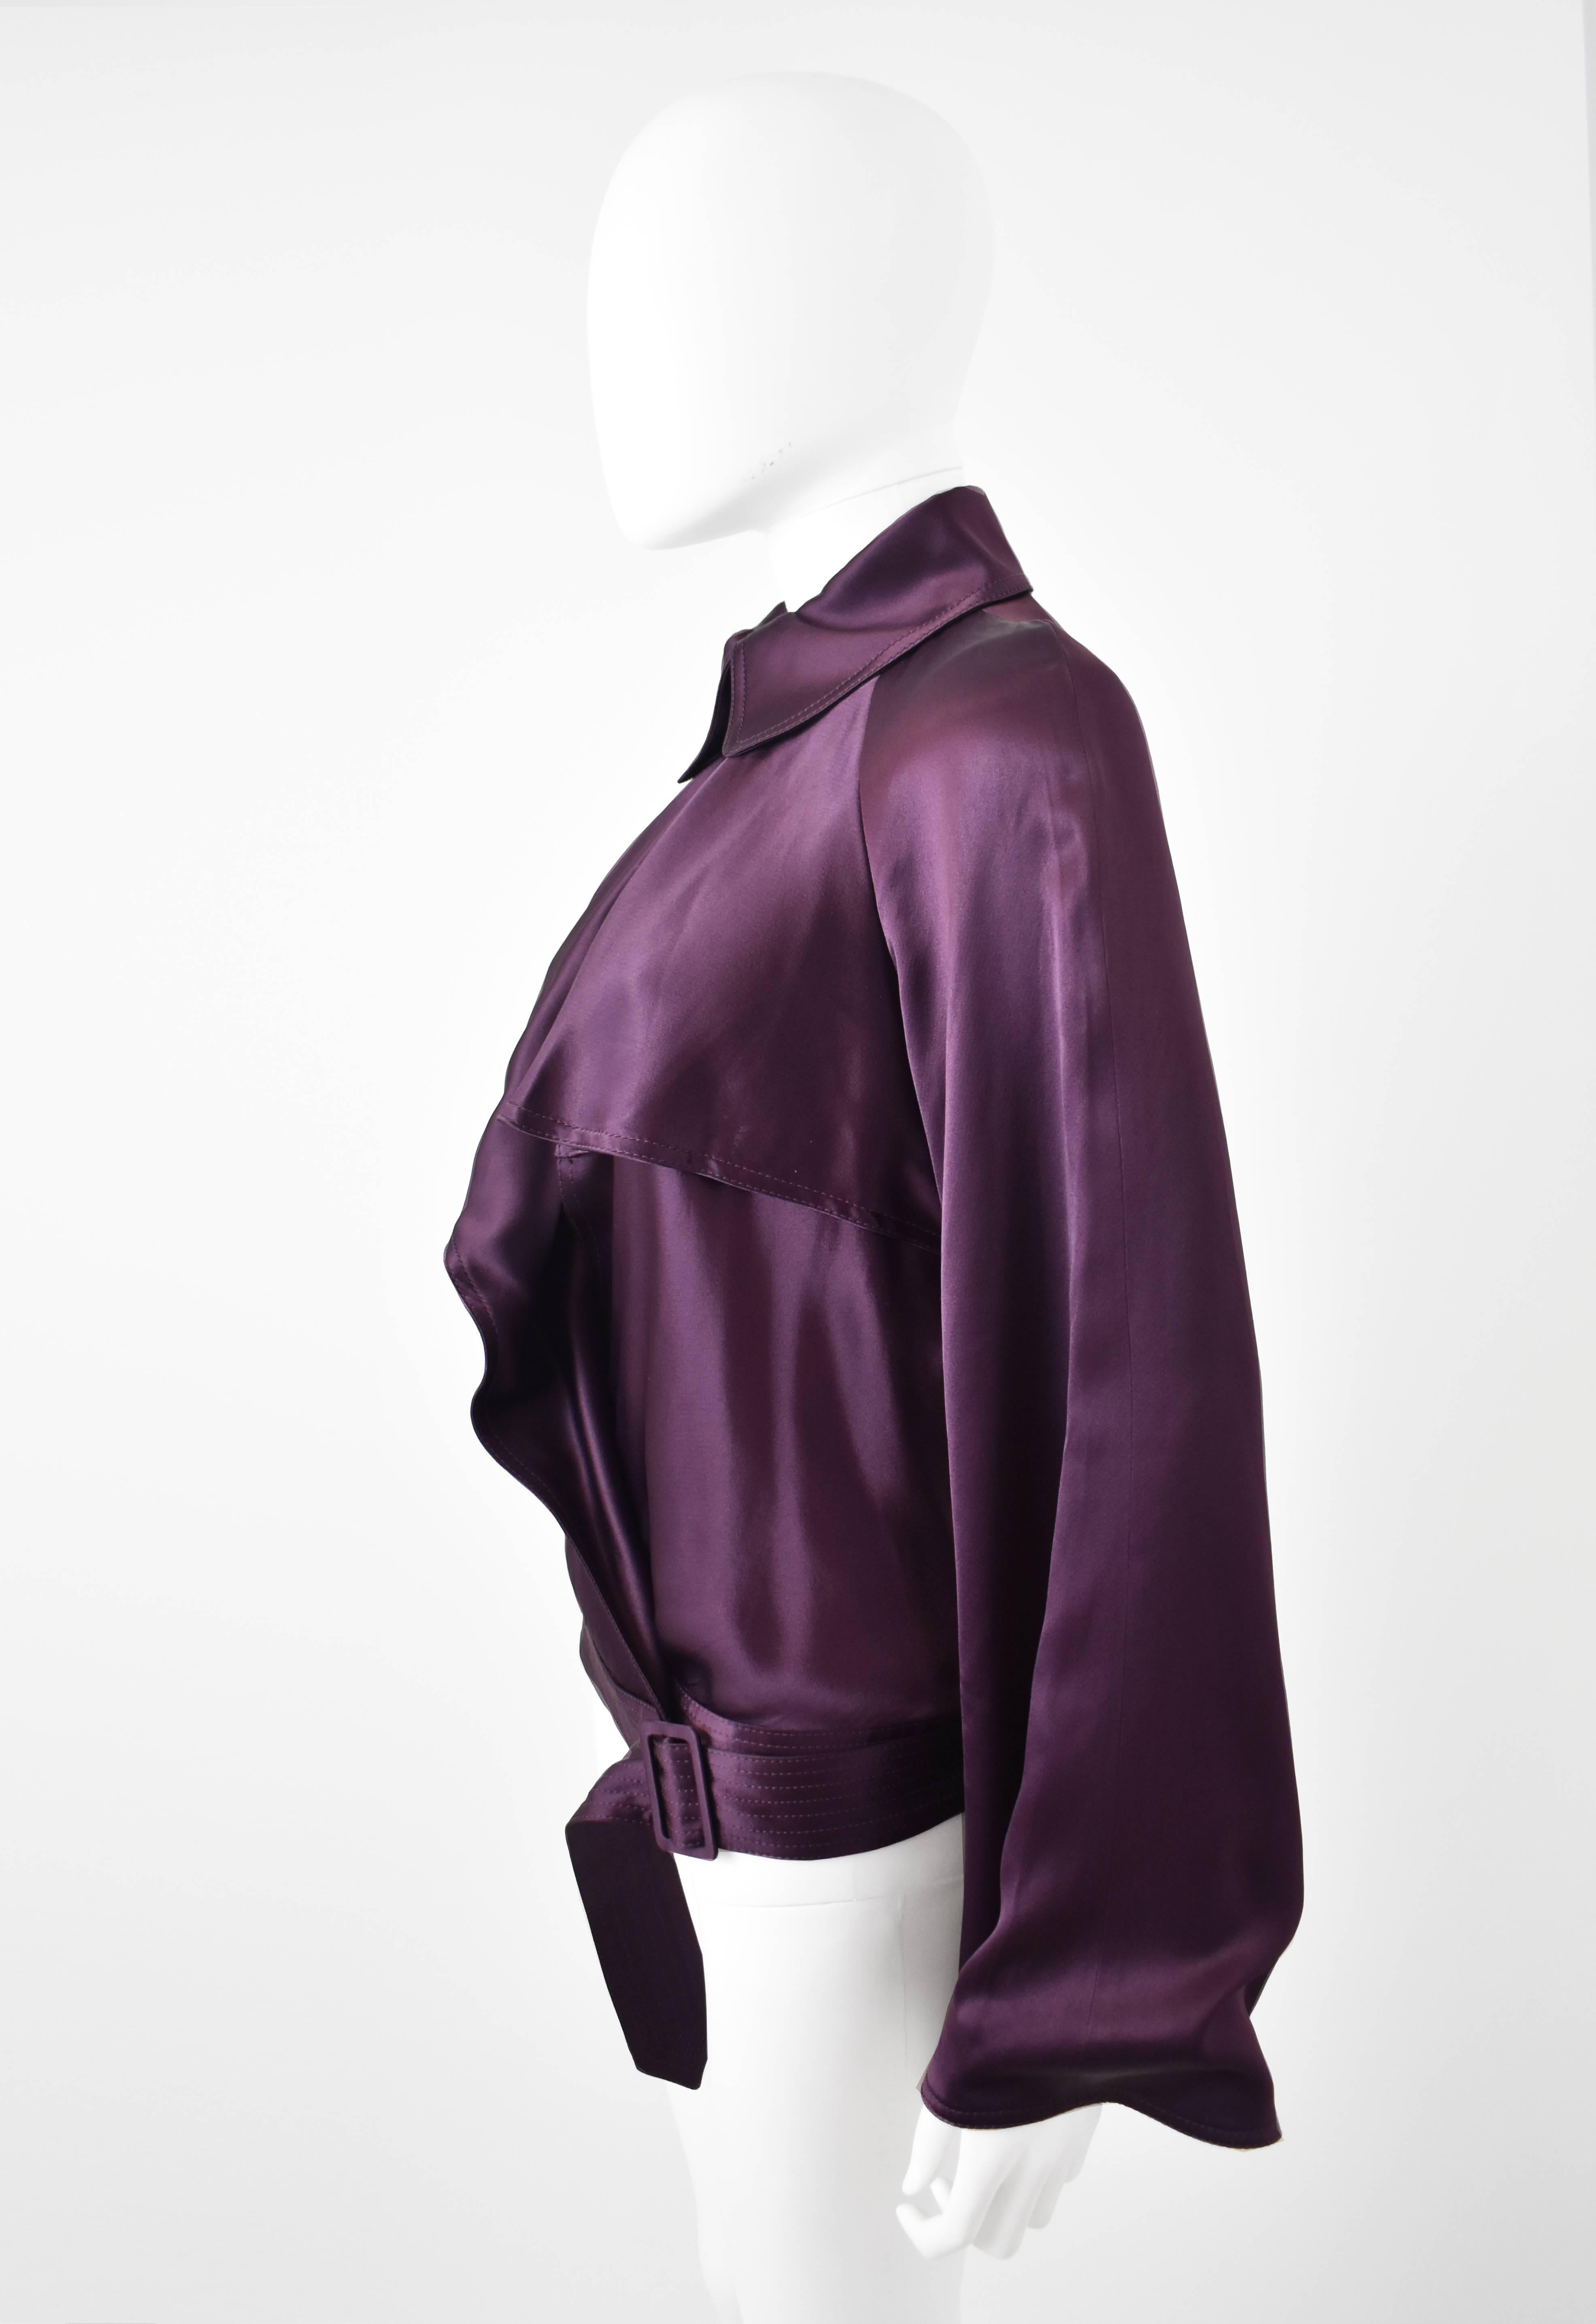 A beautiful and unusual purple top by Jean Paul Gaultier. It has an excellent shape that has a crossover, wrap-around and V-neck style. There is a belt that ties around the waist, looping through a hole in the waistband and wrapping around the